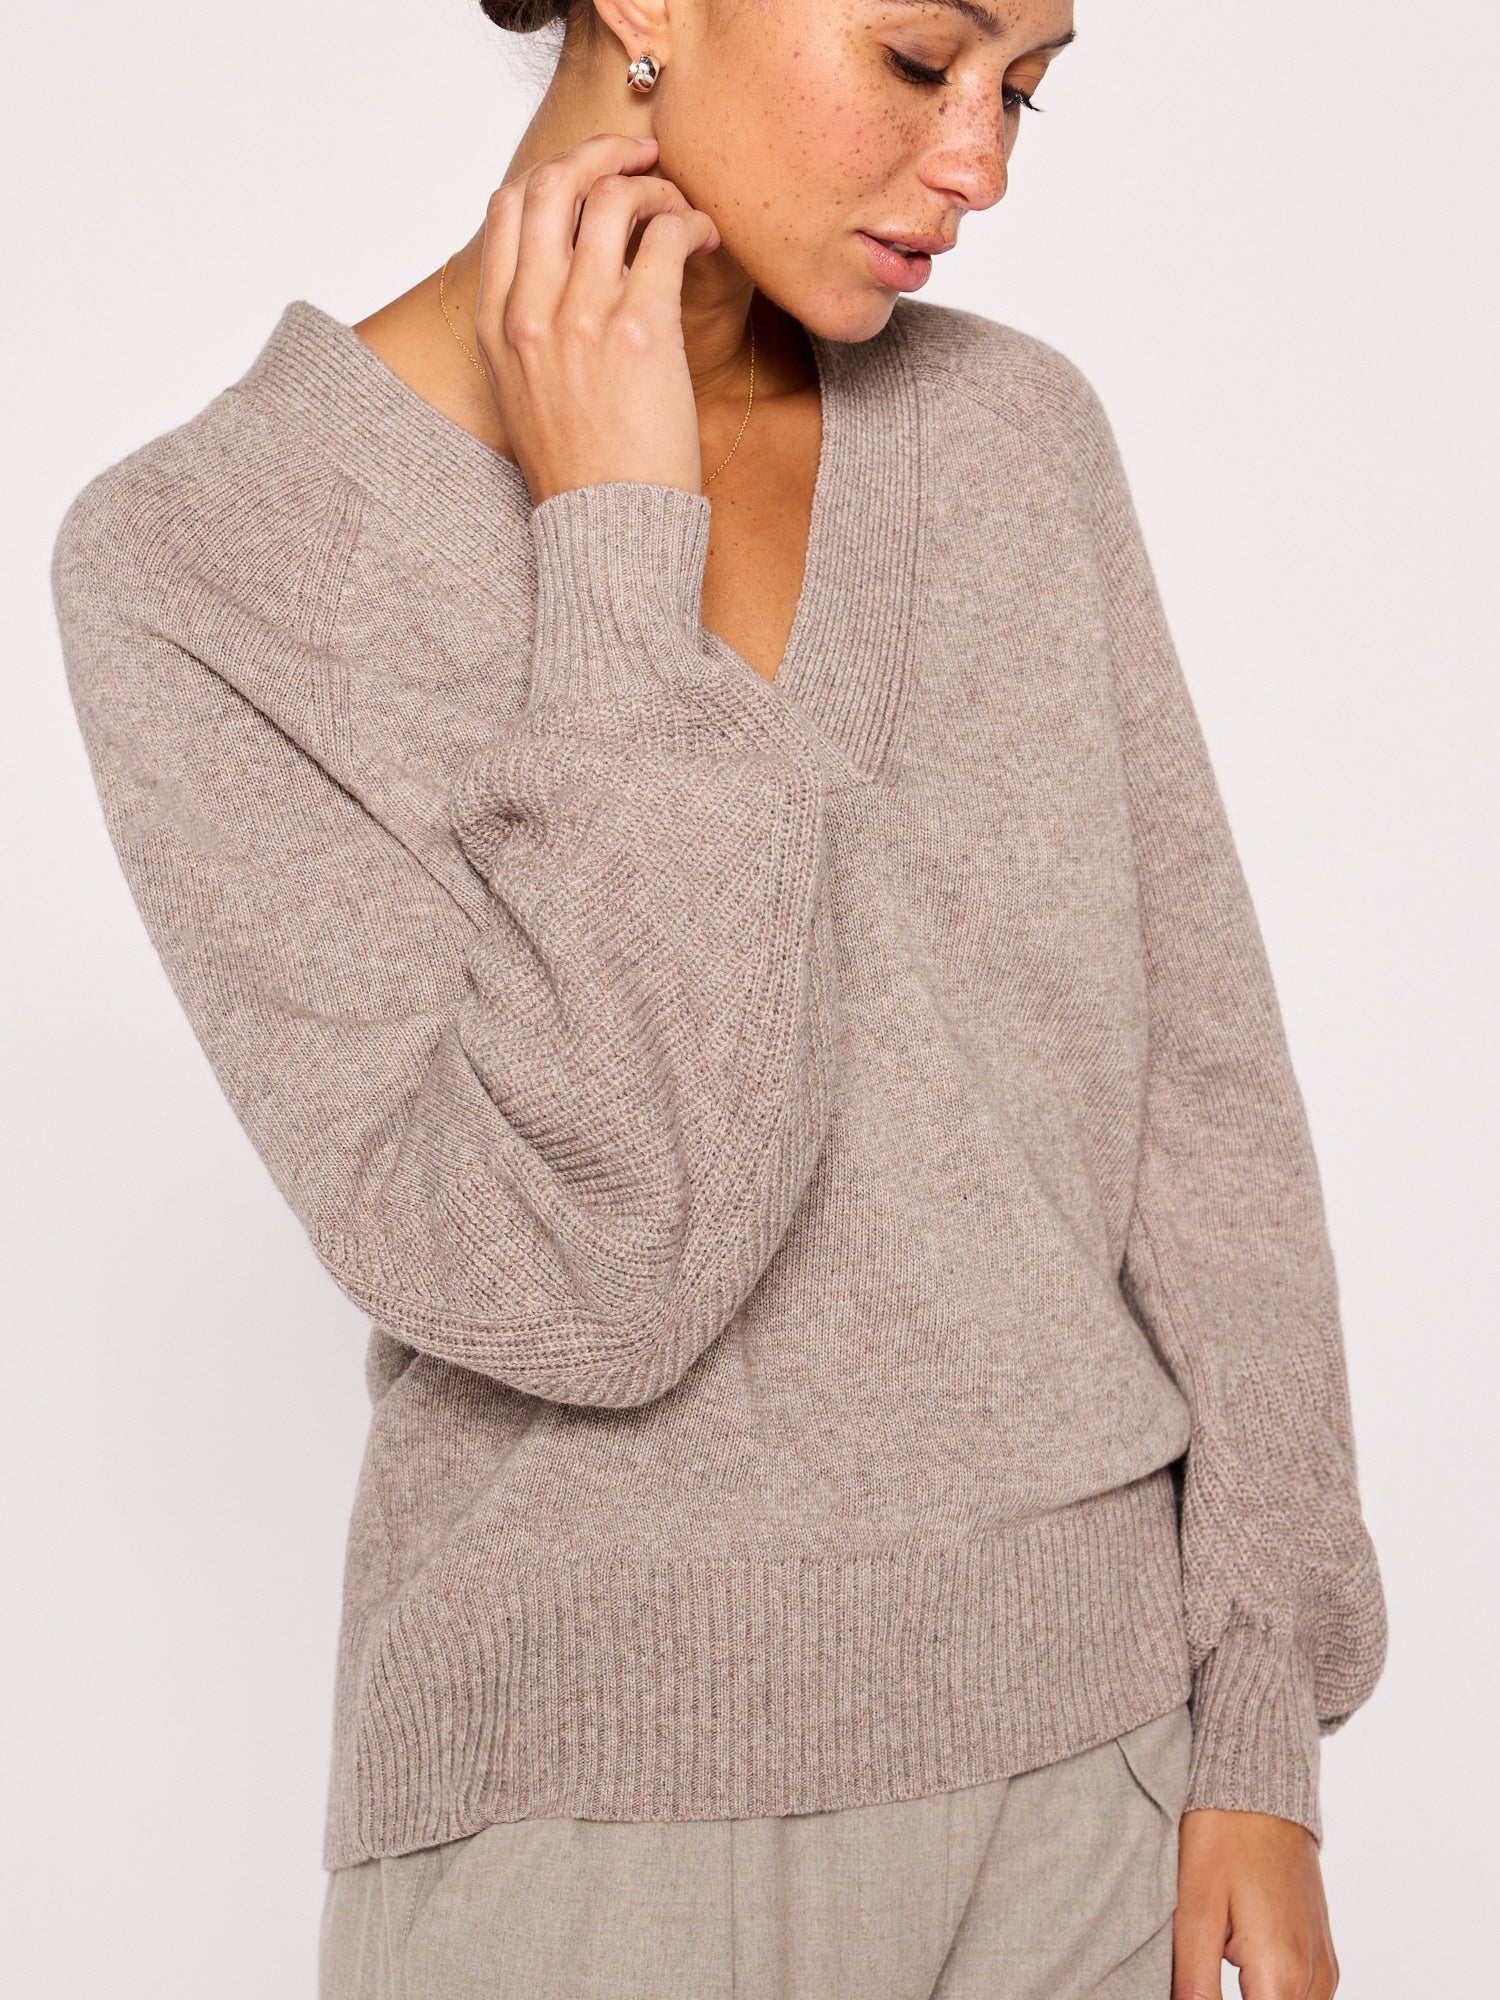 Relaxed Everyday Sweater